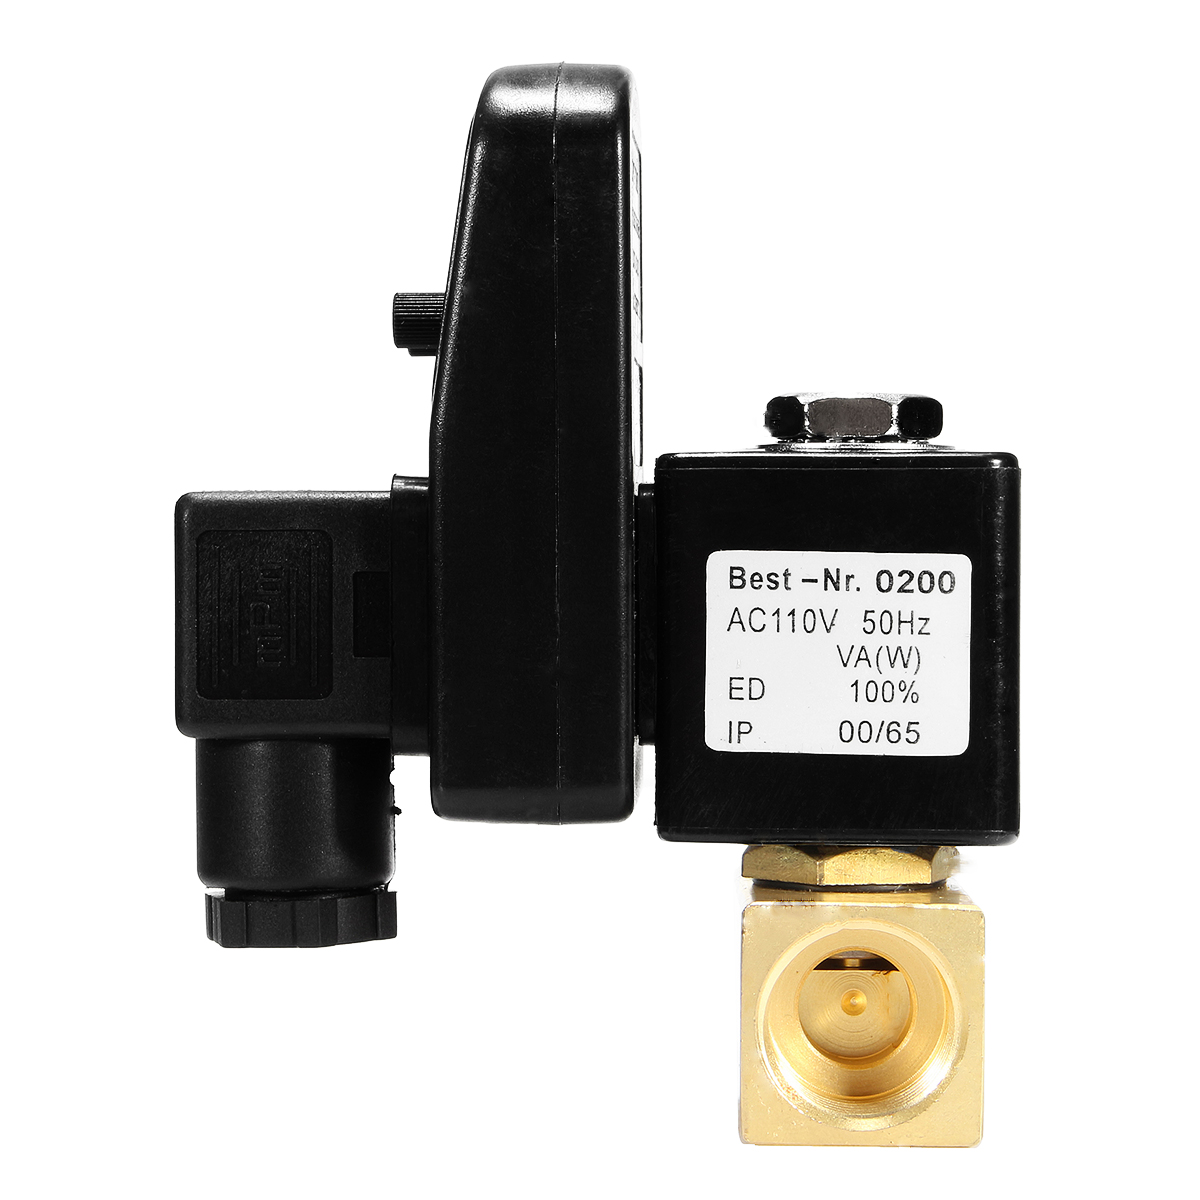 AC-110V-12-Inch-2-way-Drain-Valve-Electronic-Timed-Air-Compressor-Condensate-Auto-Pressure-Switch-1174086-9